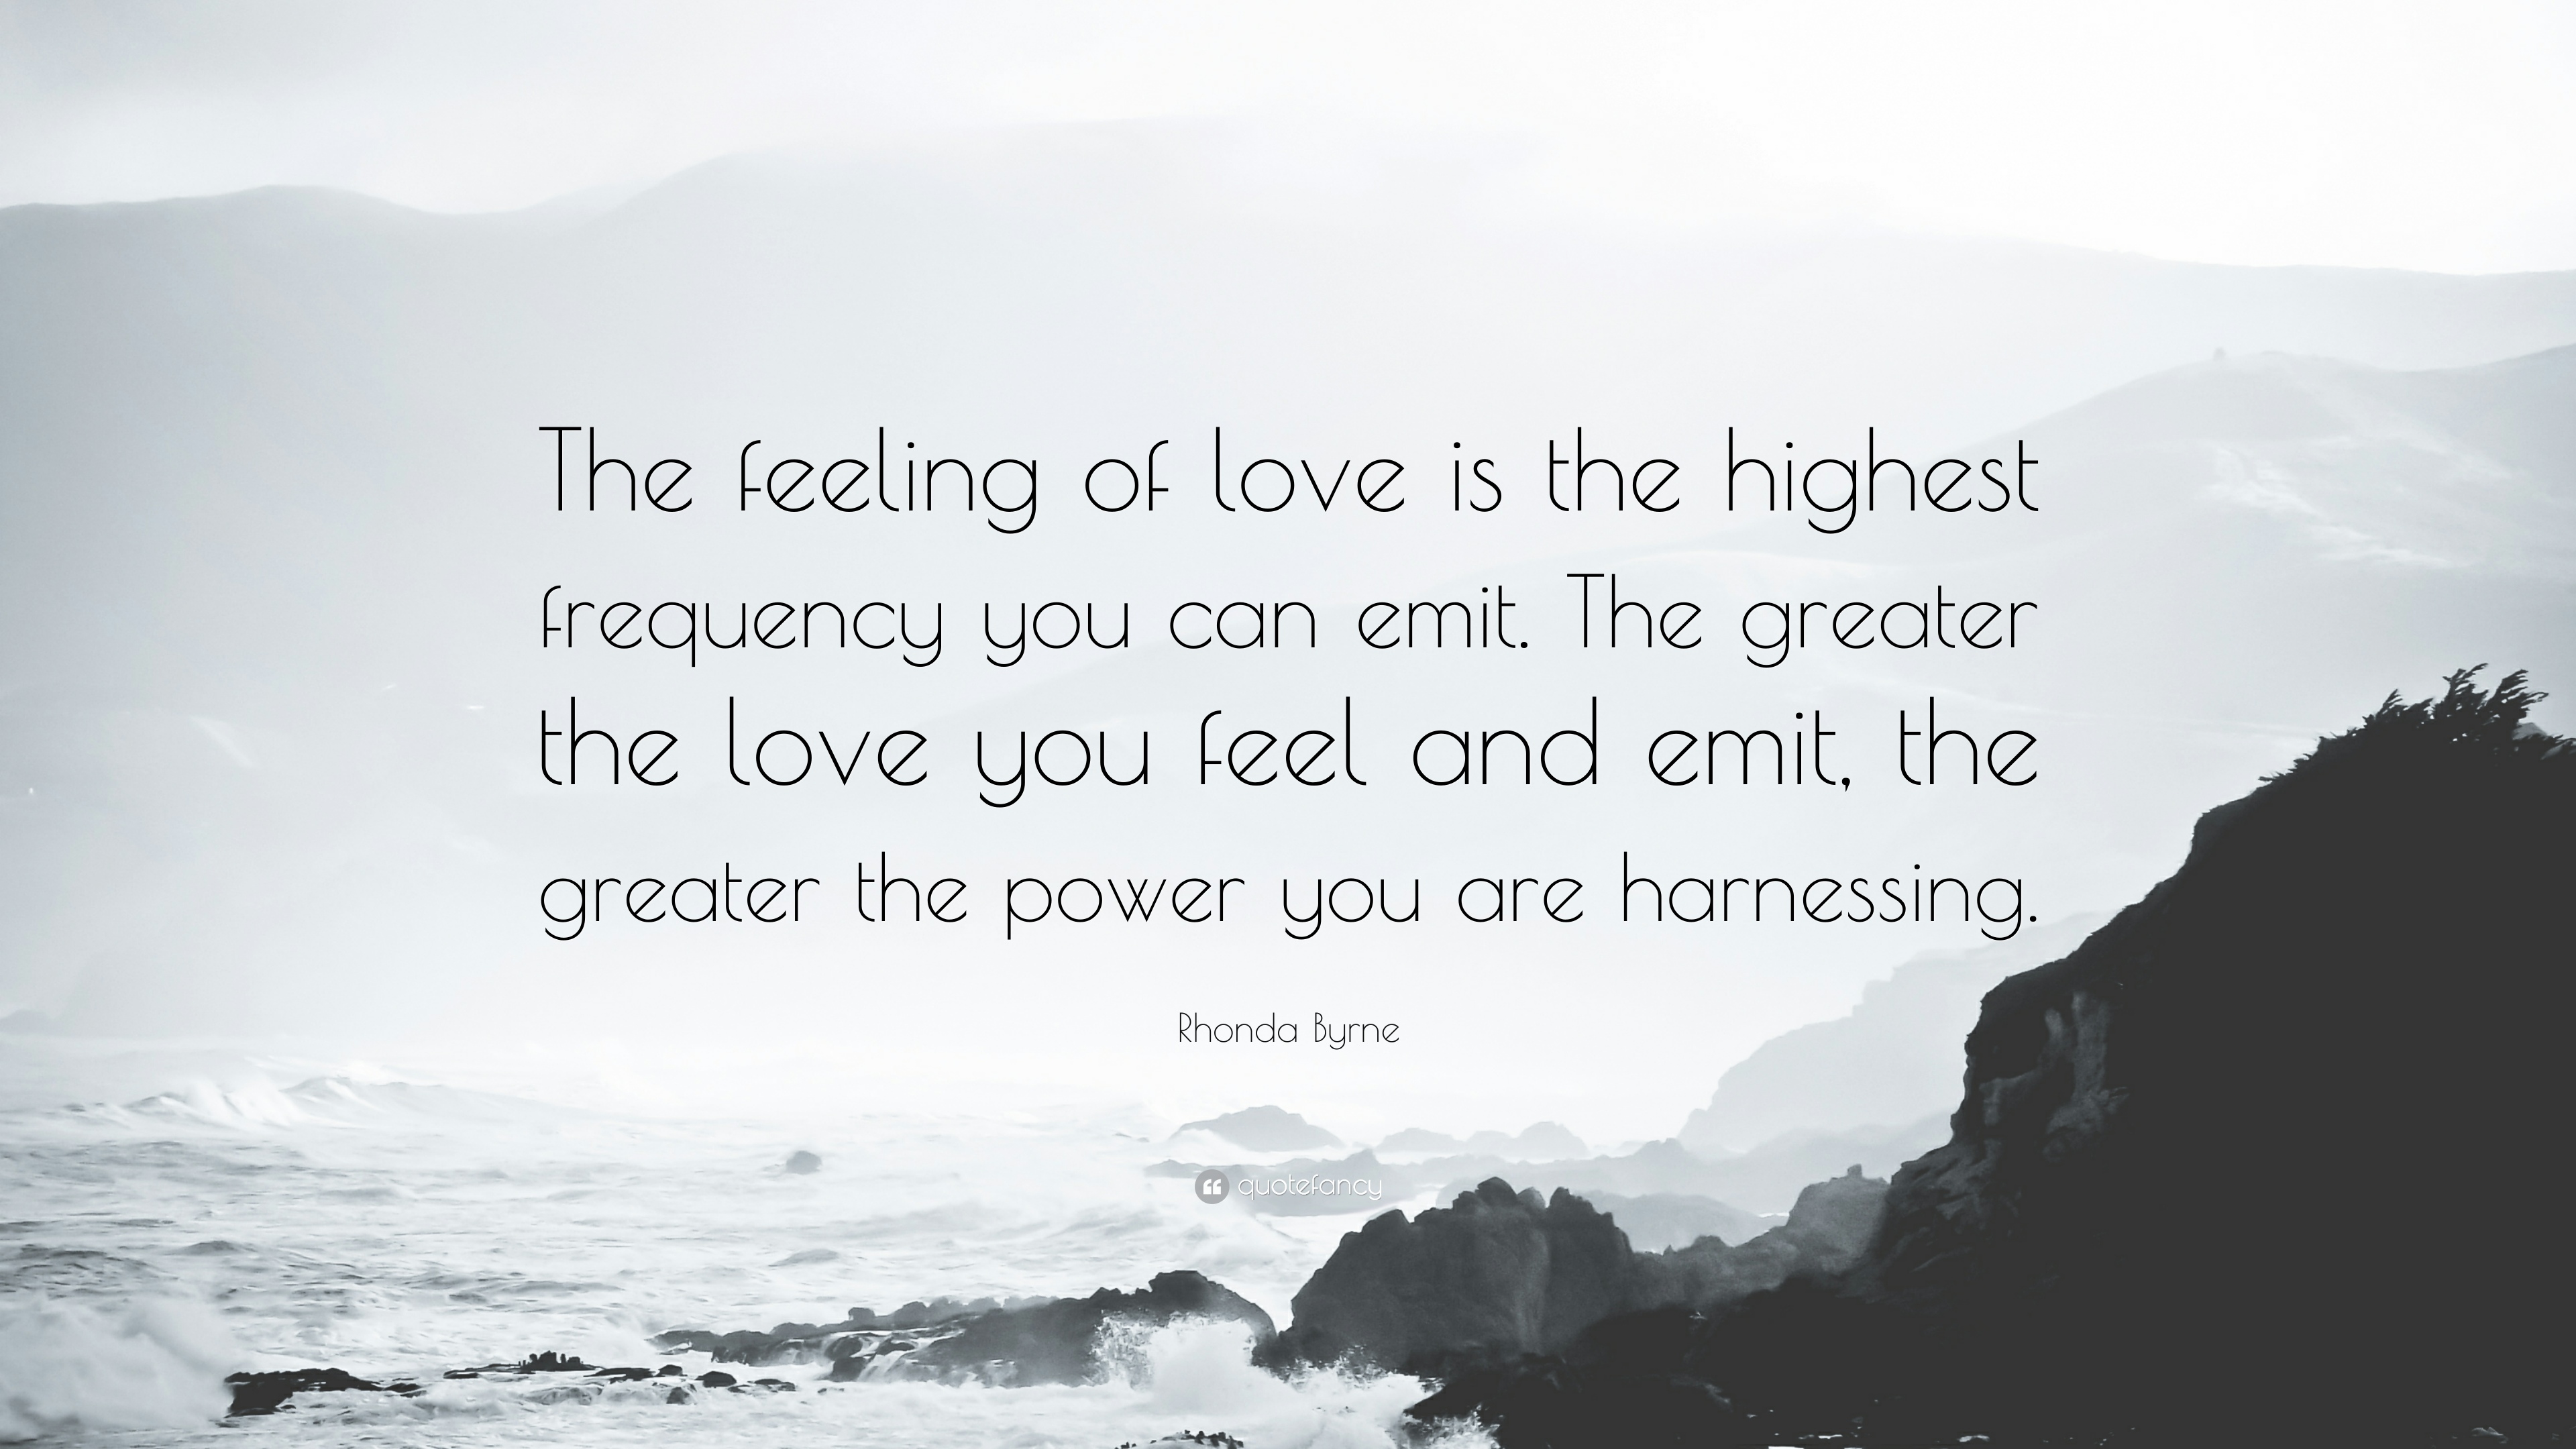 Rhonda Byrne Quote: “The feeling of love is the highest